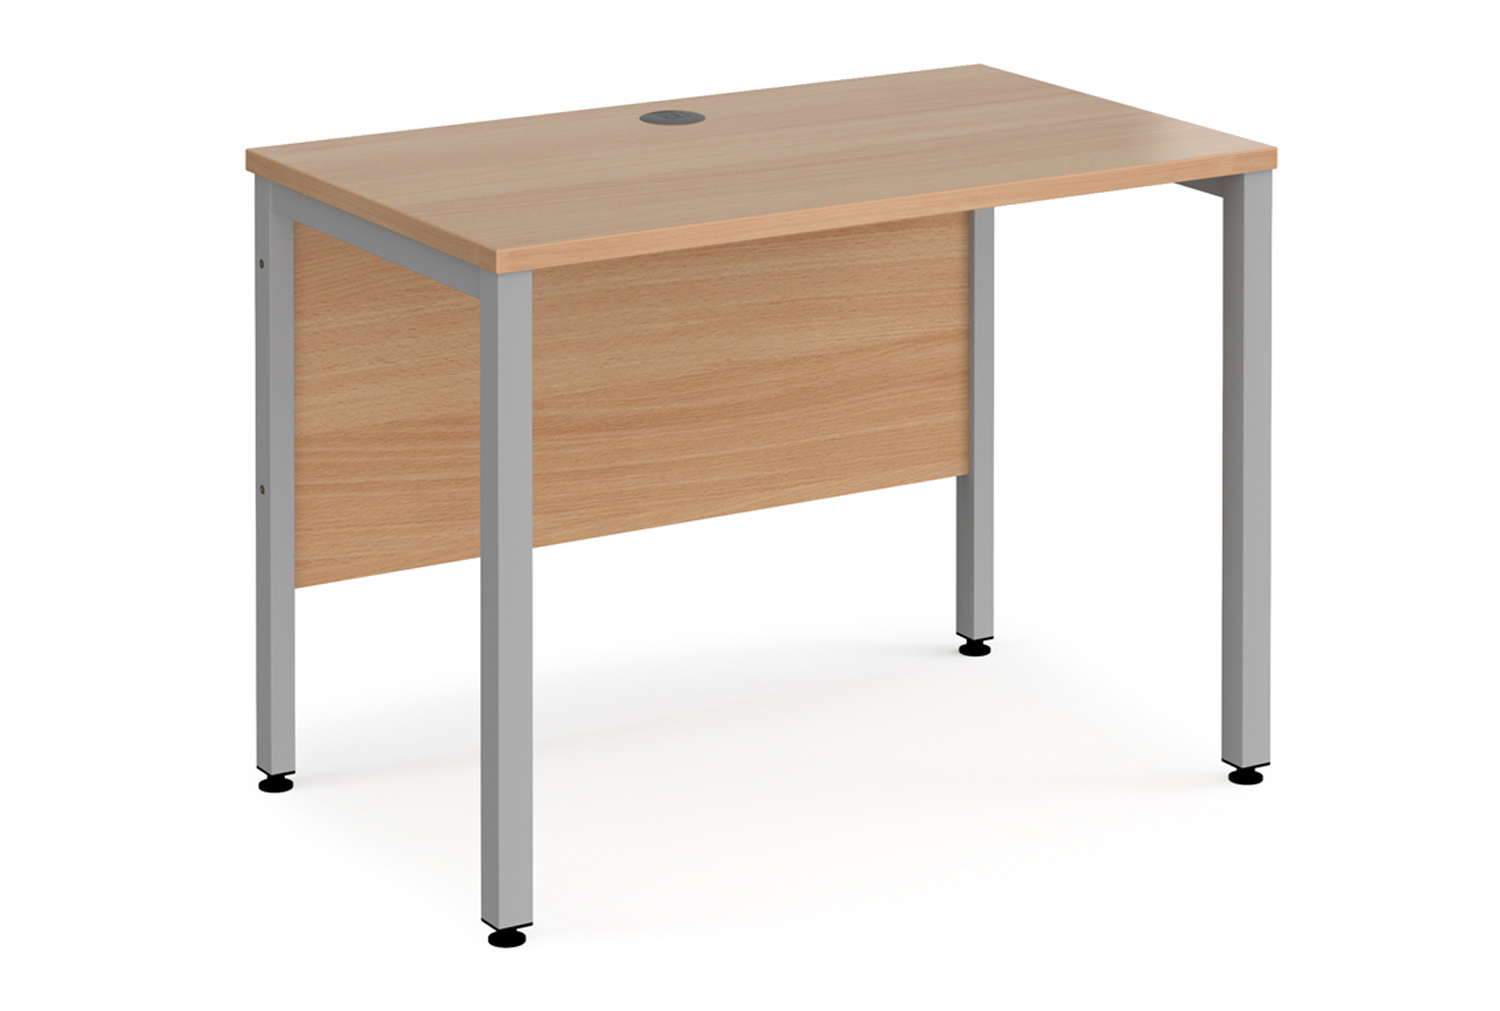 Value Line Deluxe Bench Narrow Rectangular Office Desks (Silver Legs), 100wx60dx73h (cm), Beech, Express Delivery